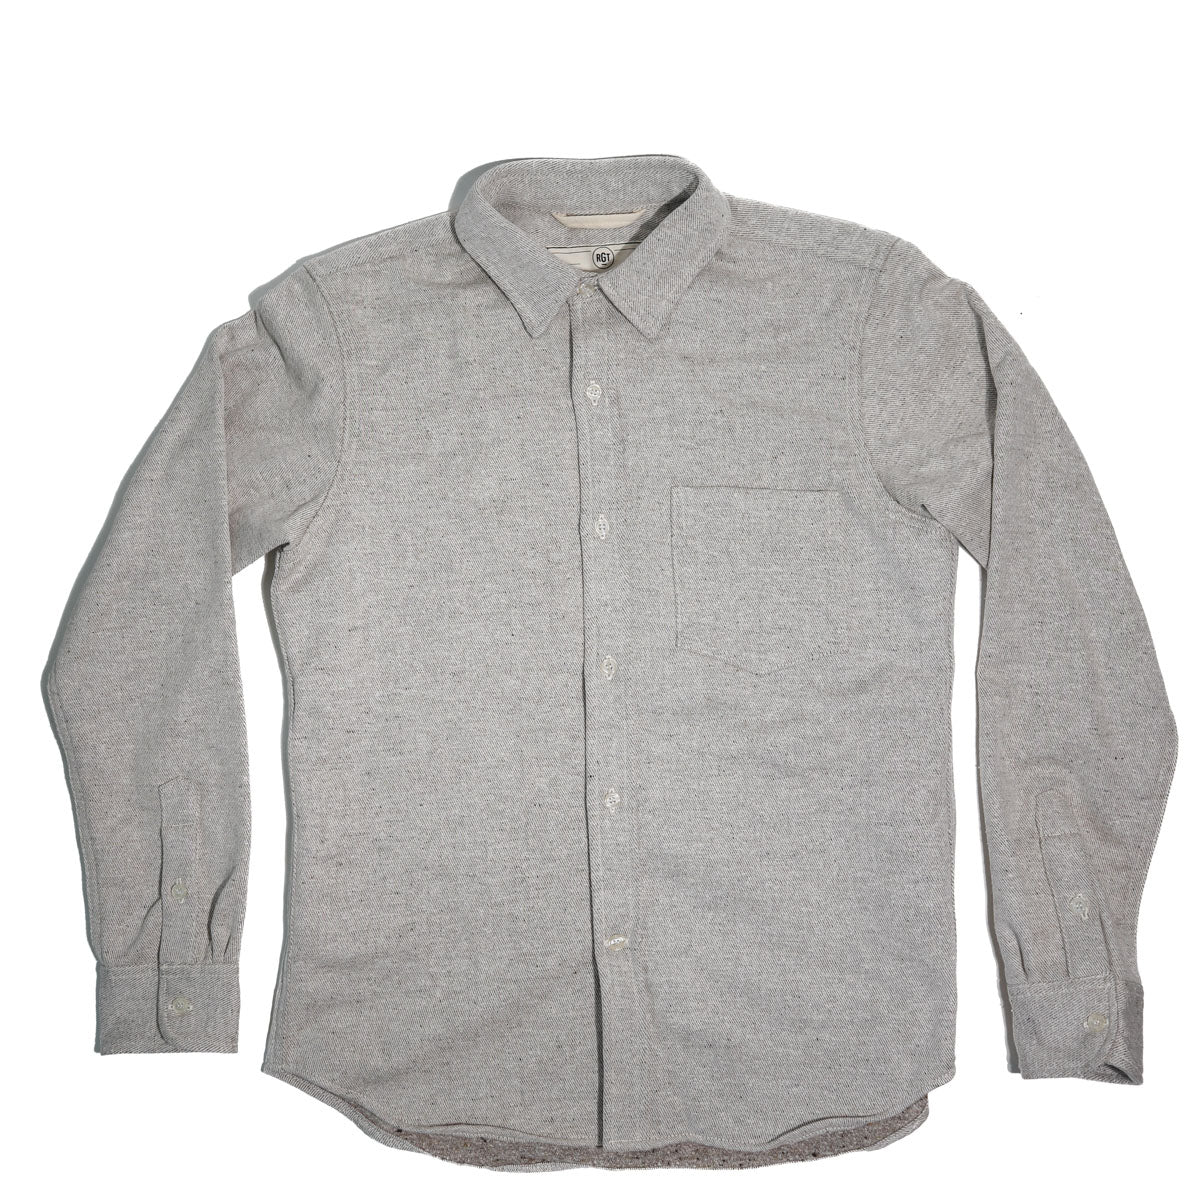 Rogue Territory Service Shirt - Copper Brushed Flannel